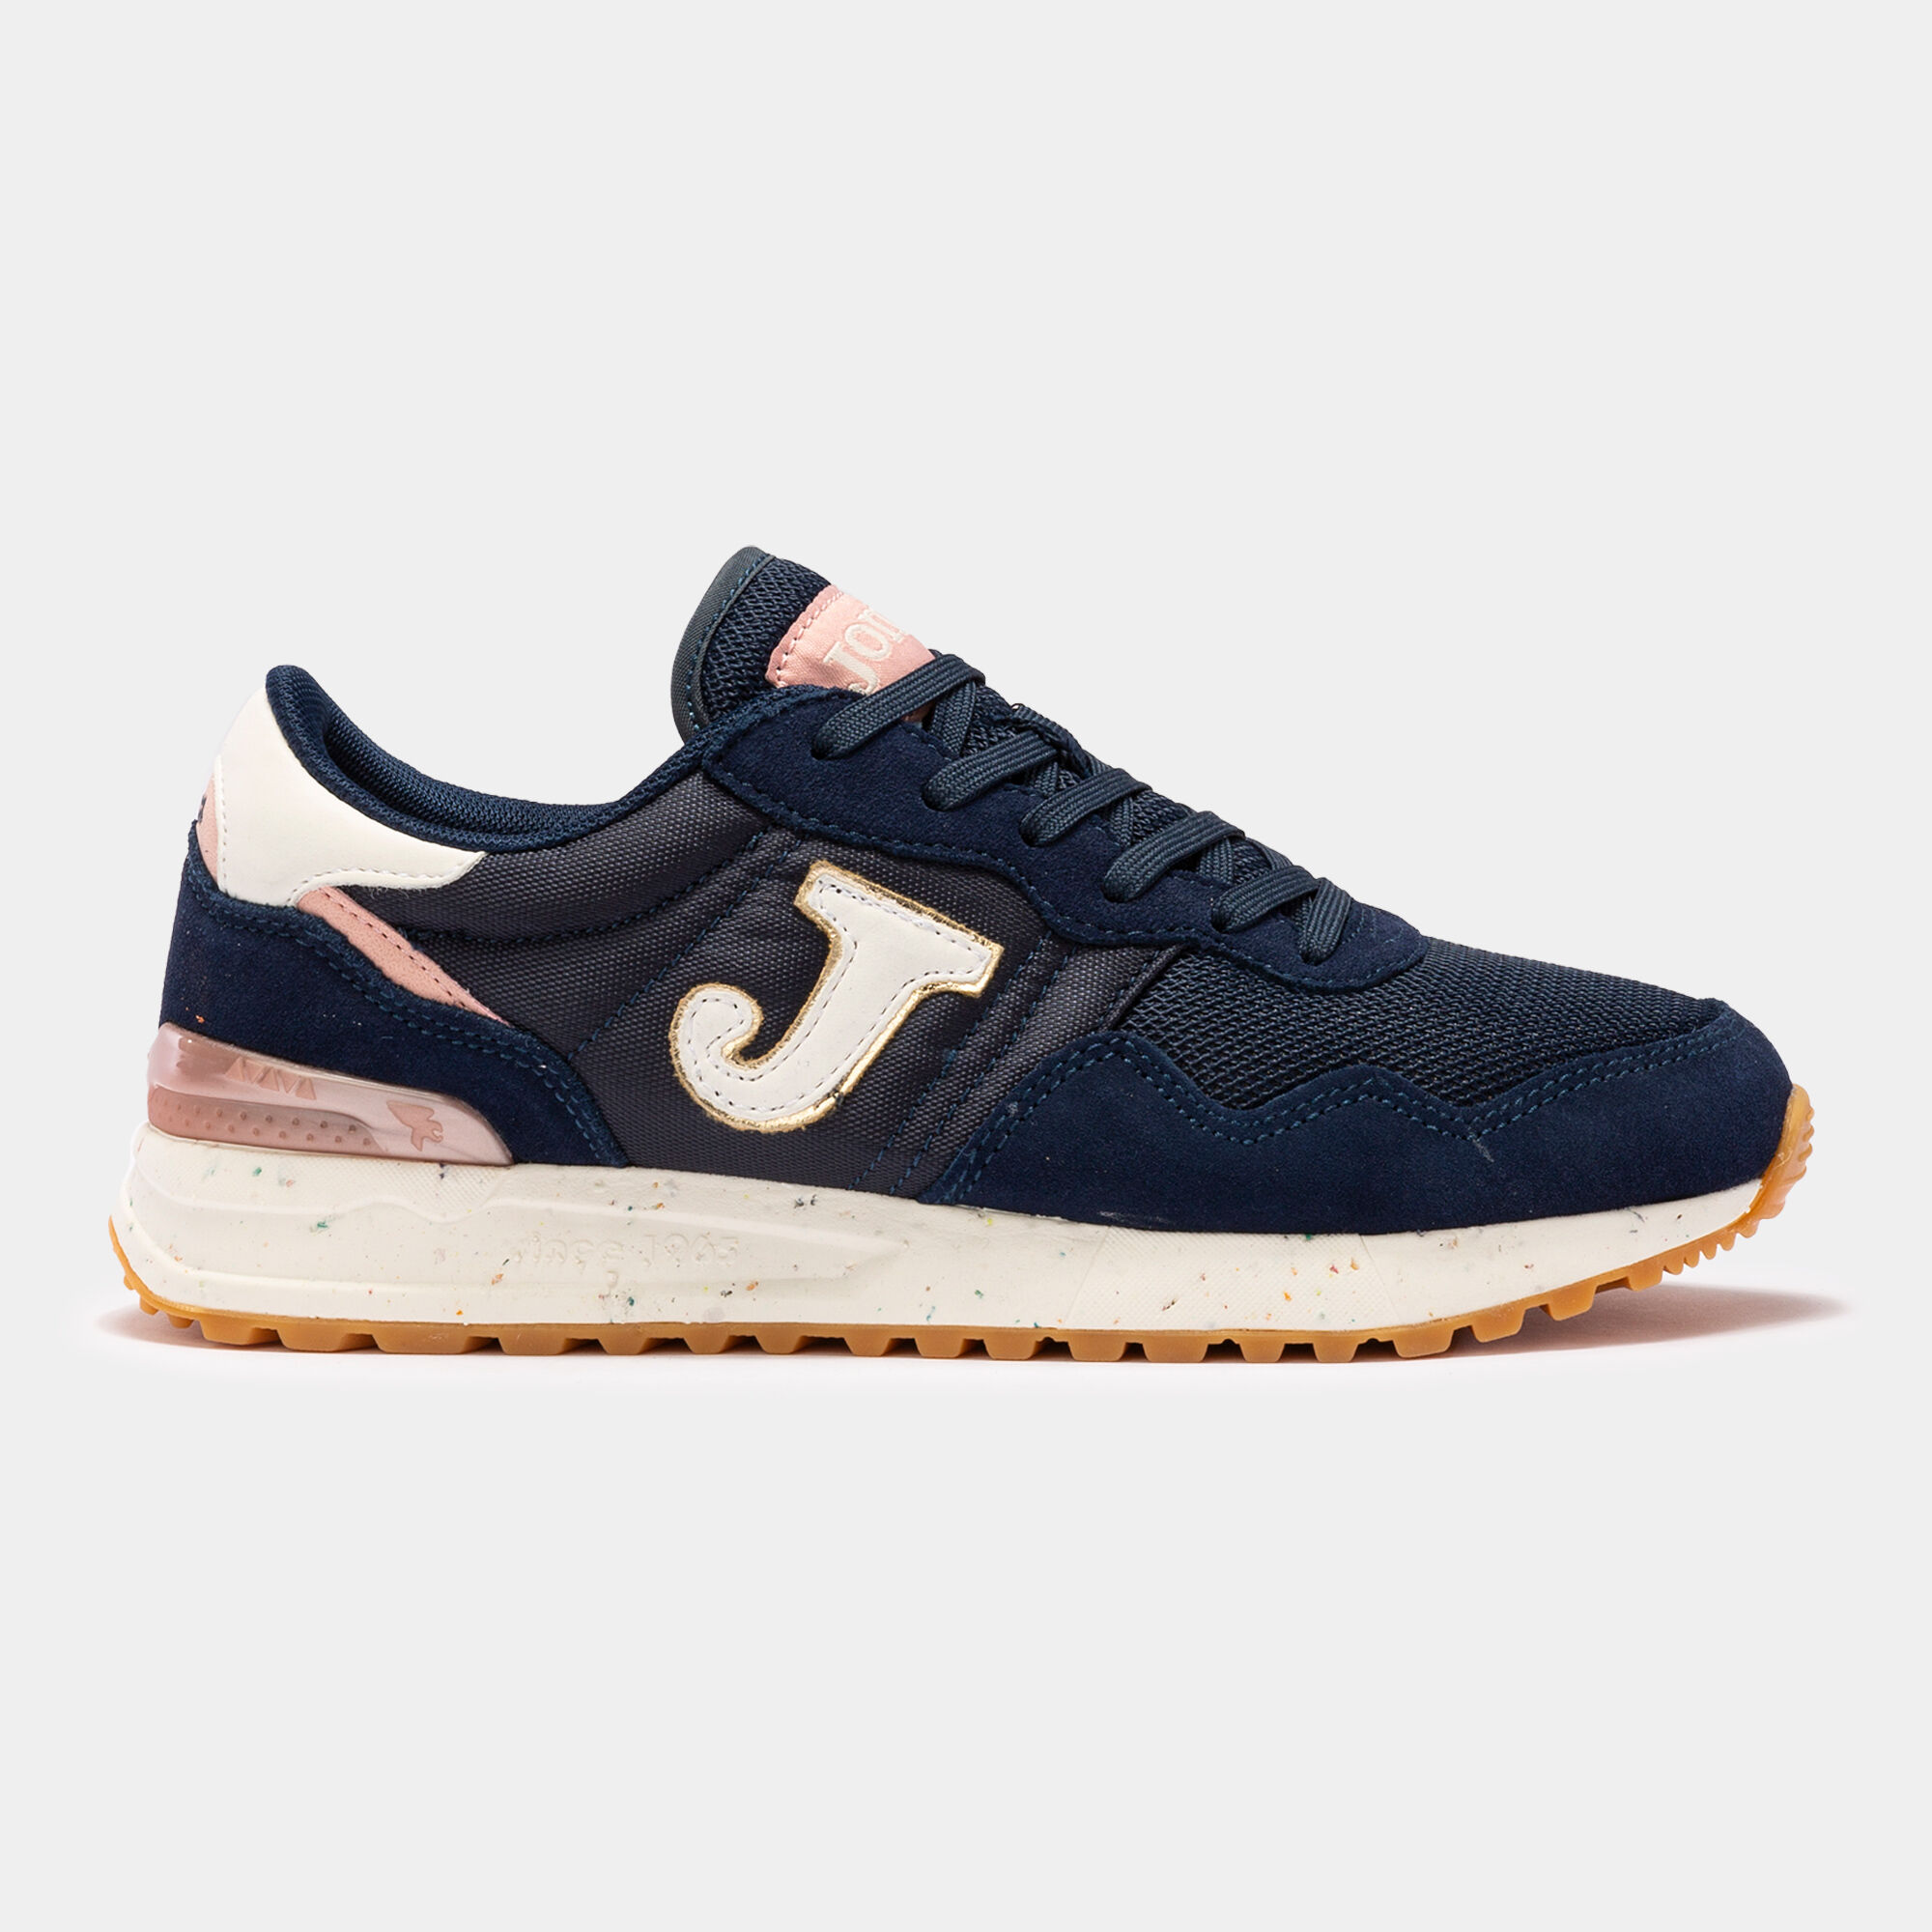 CASUAL SHOES C.367 22 WOMAN NAVY BLUE PINK